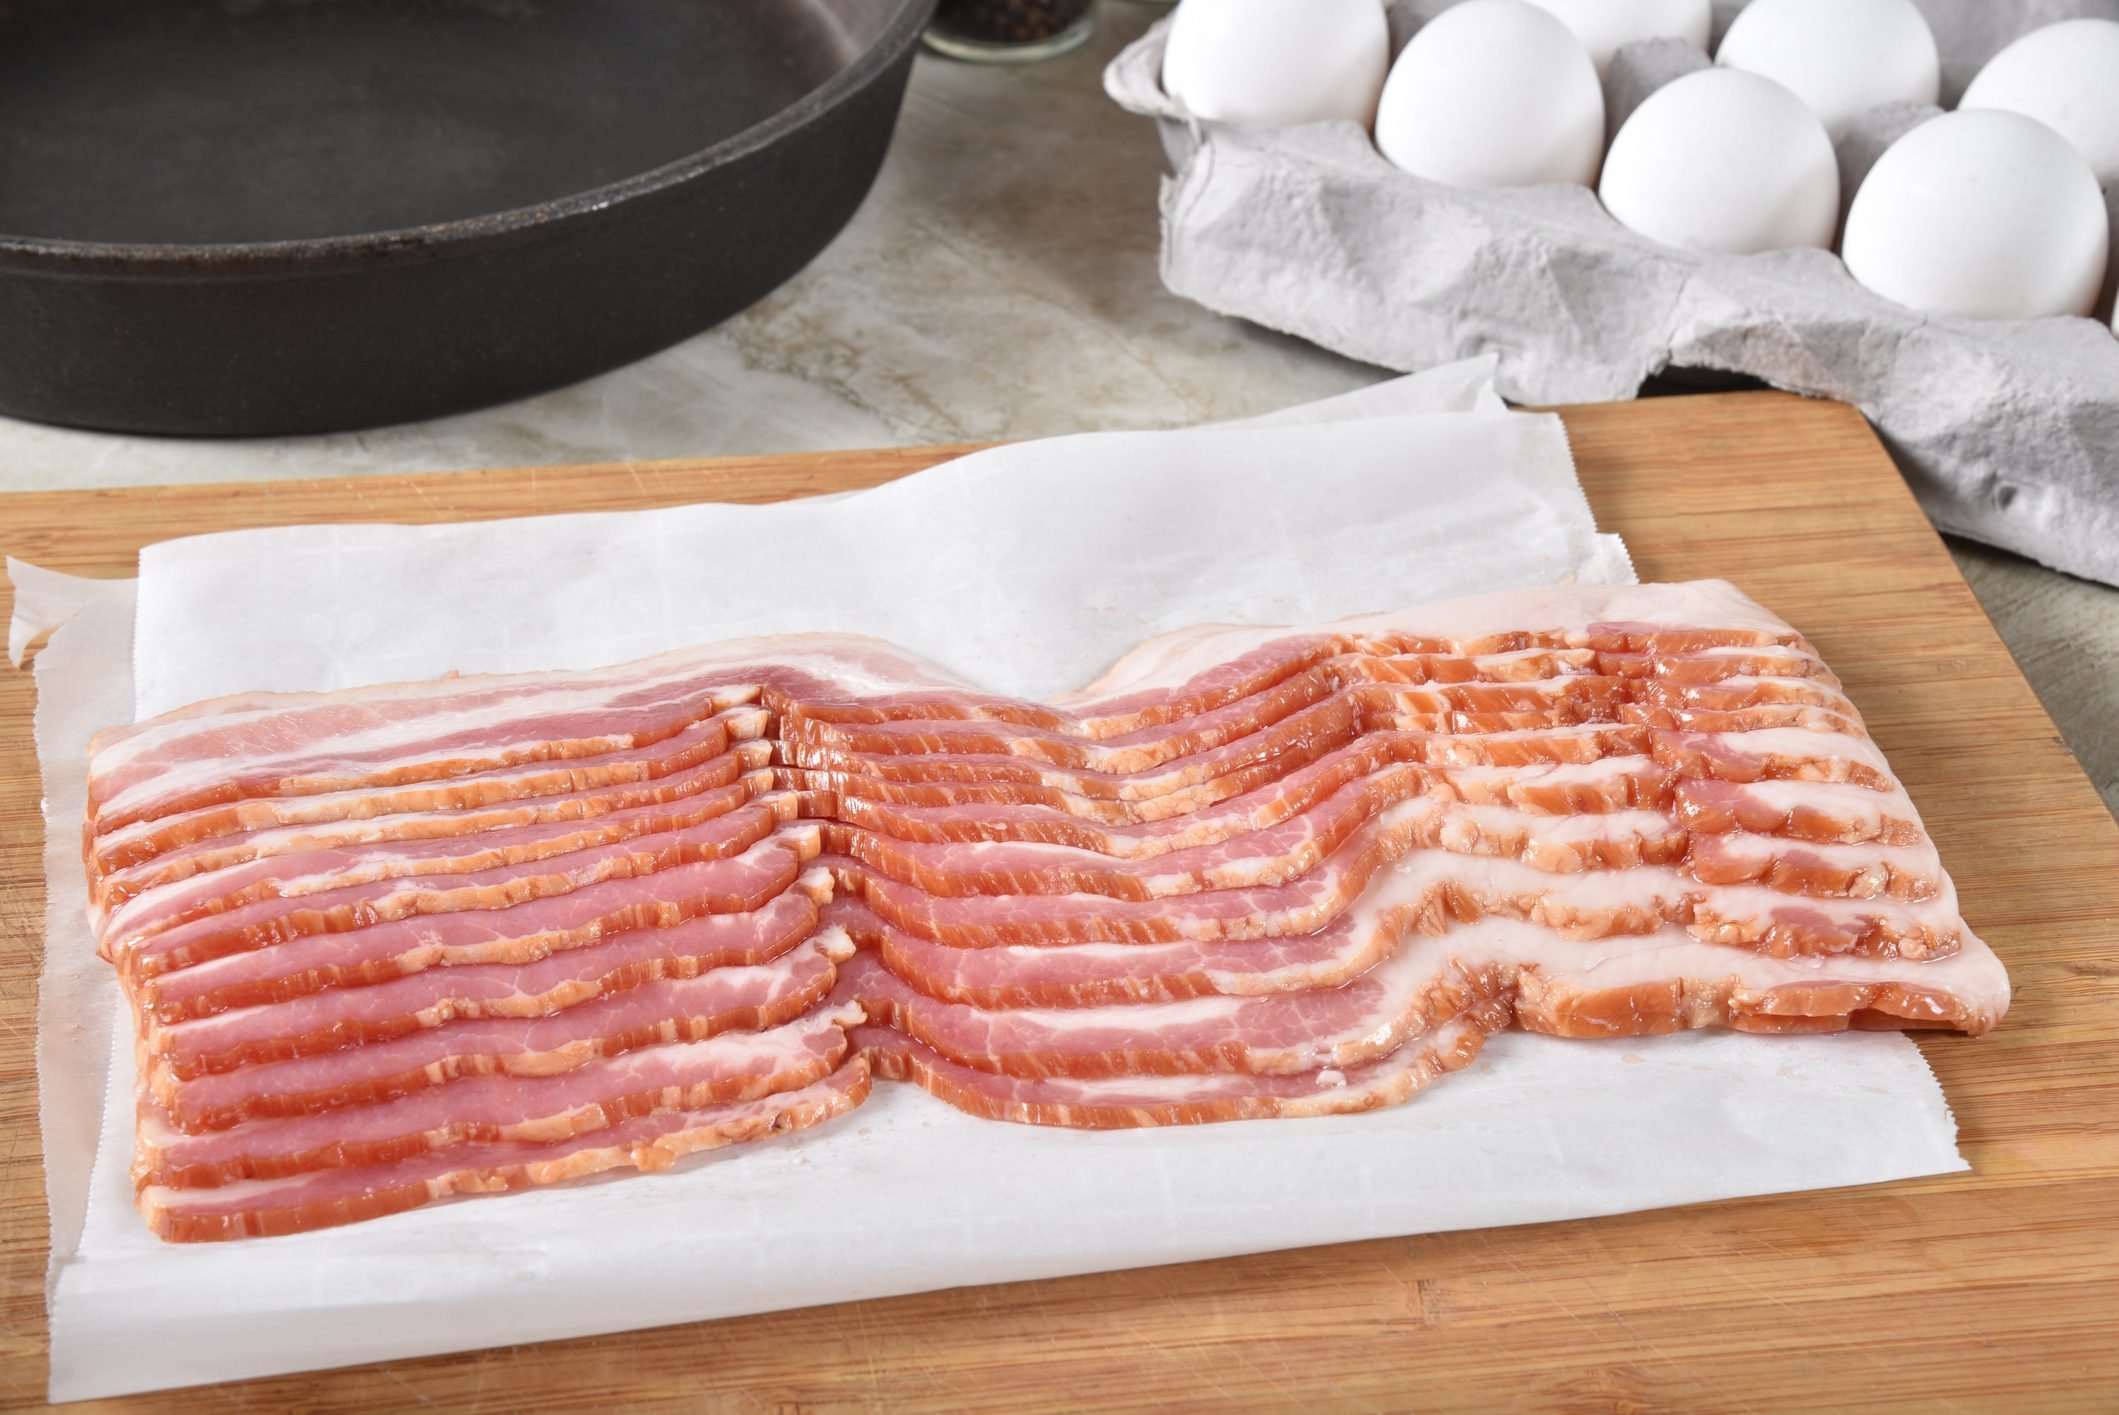 Can You Eat Uncooked Bacon, or Does It Need to Be Cooked?